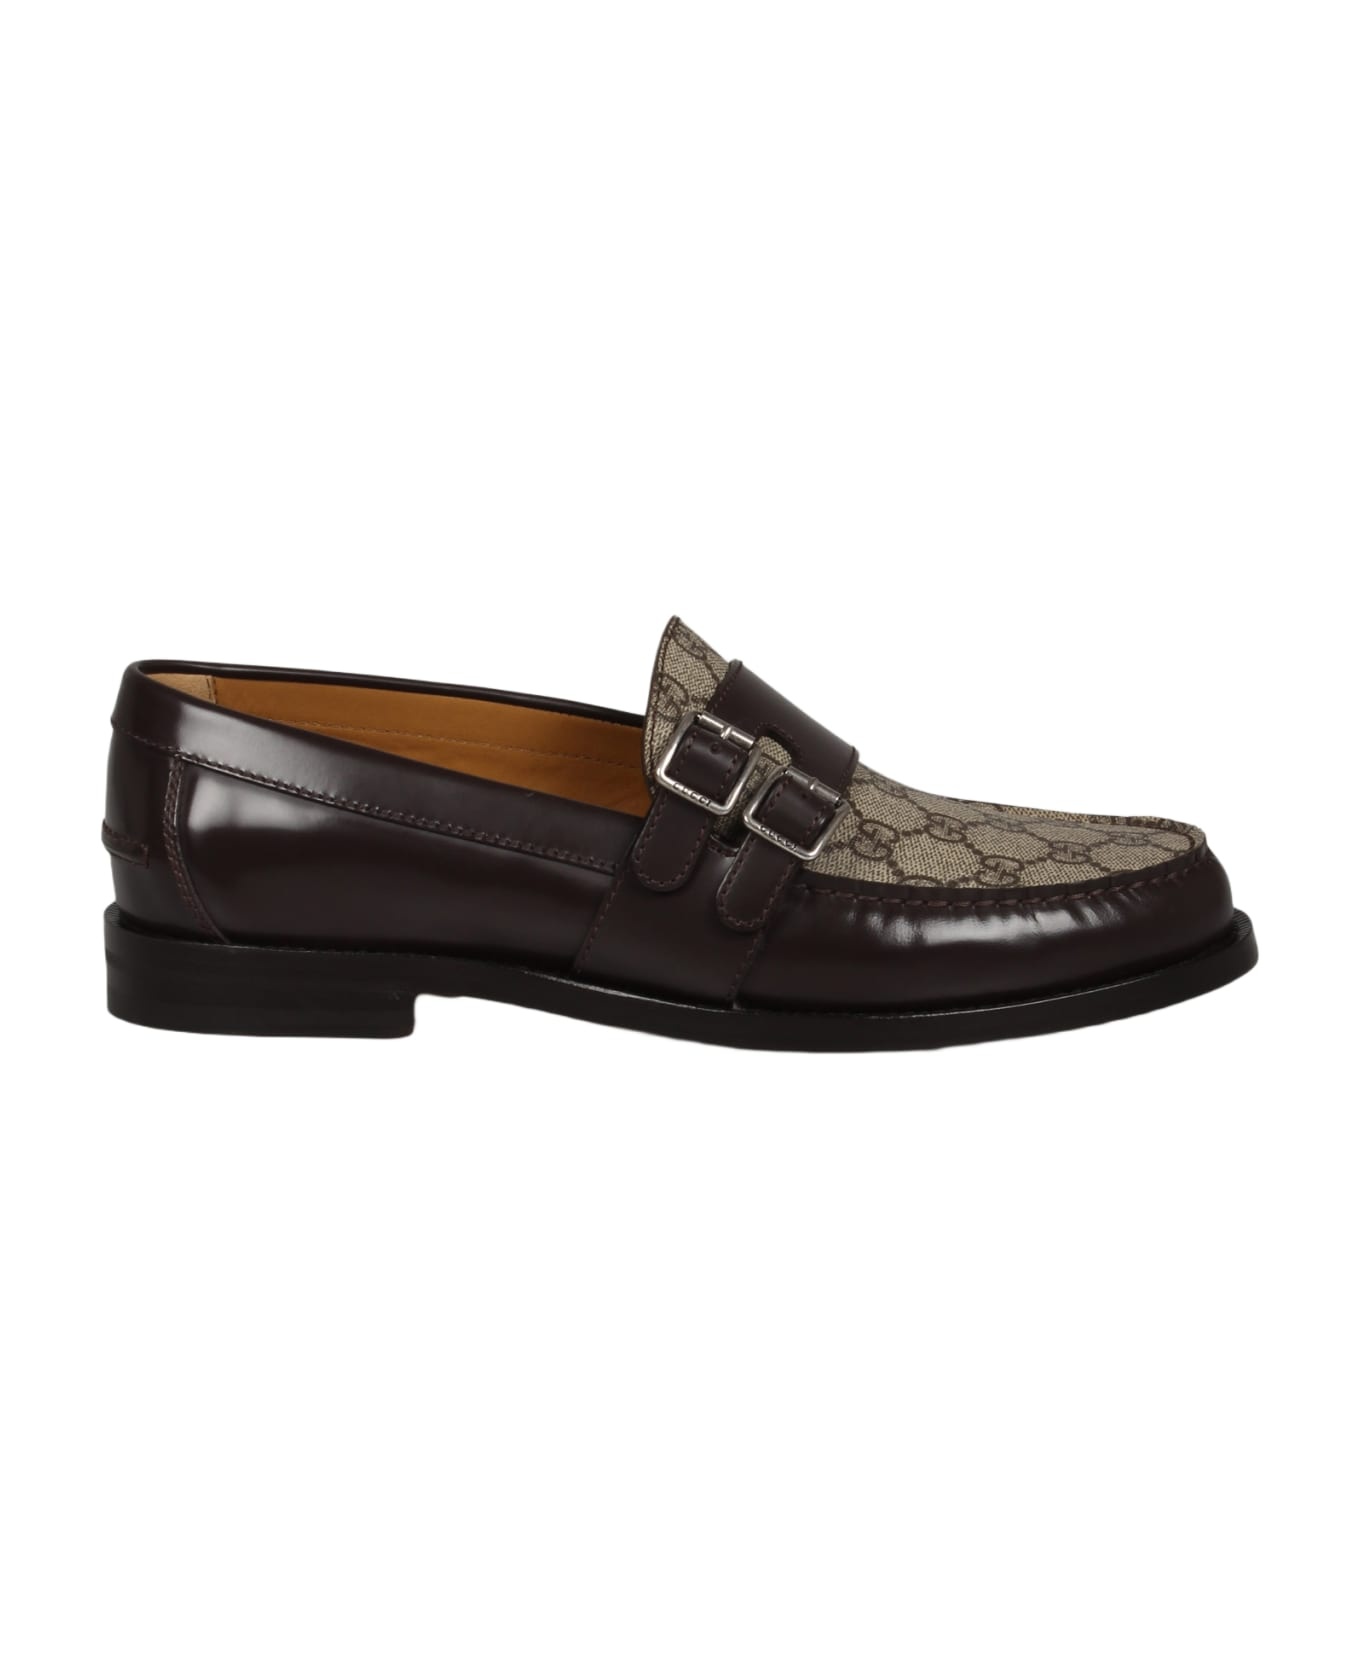 Gg Buckle Loafers - 1